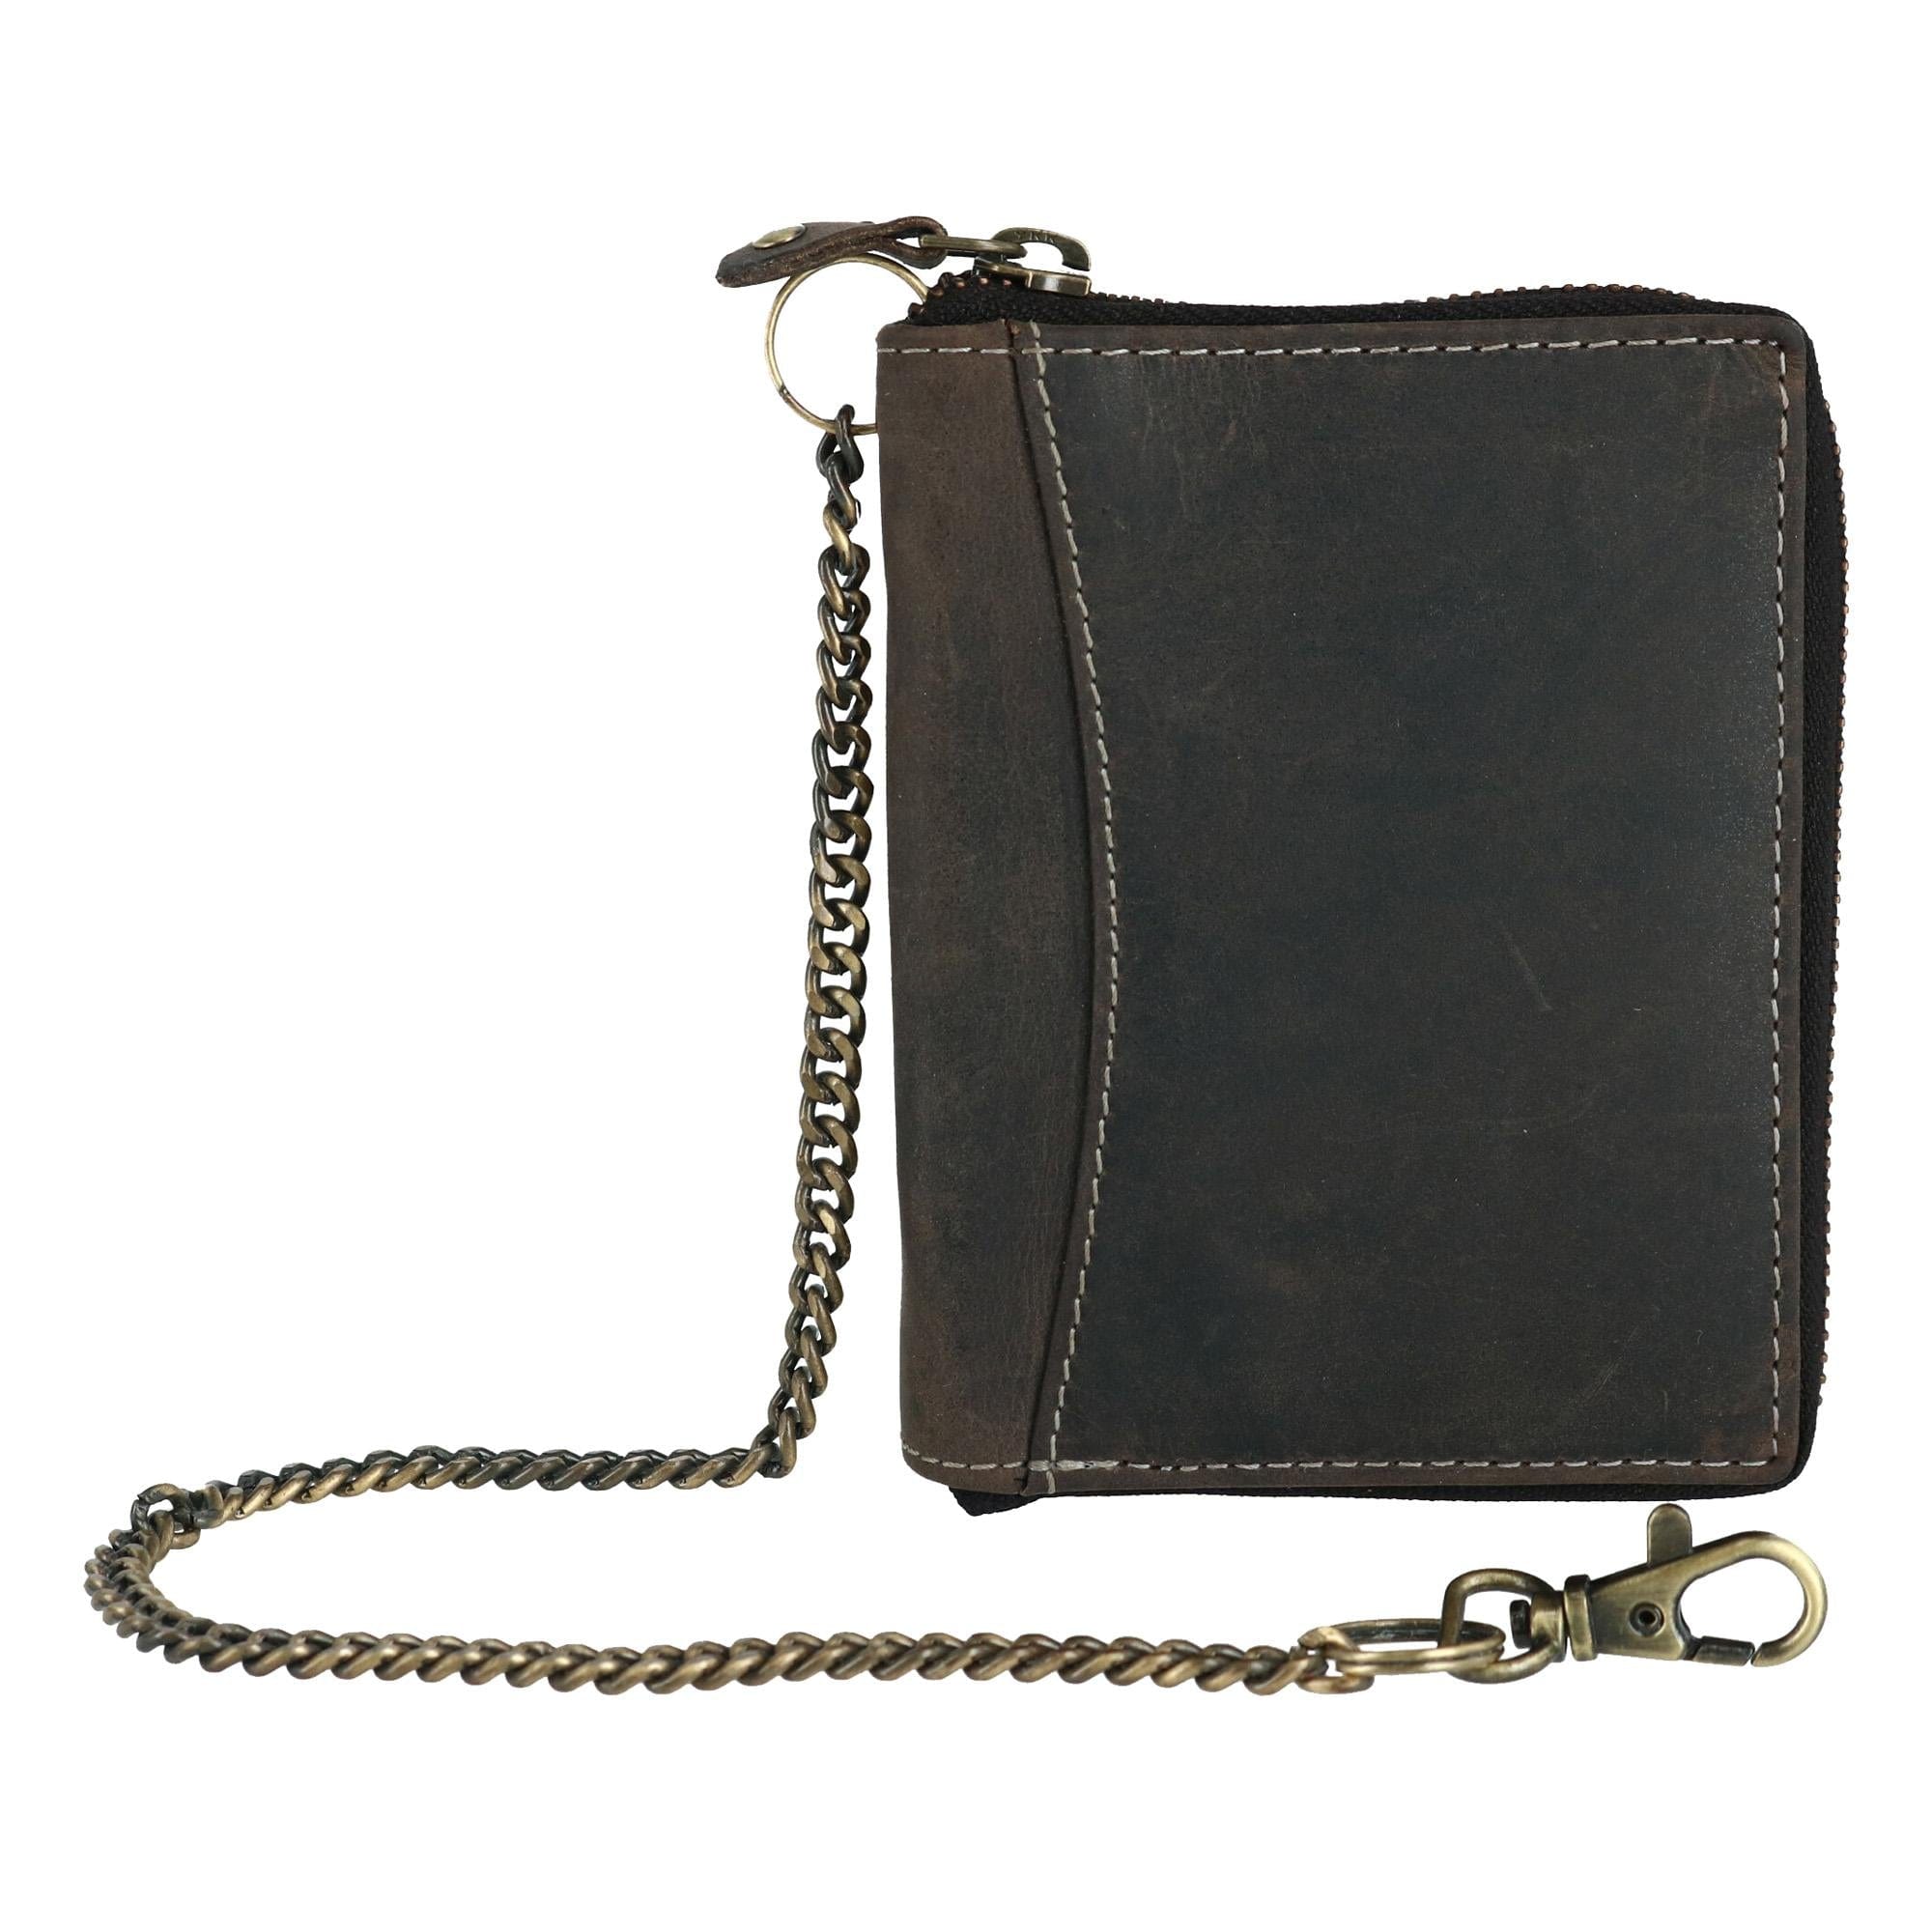 Men's Leather Wallet Purse with Chain Punk Biker Skull Wallet black | PGMall